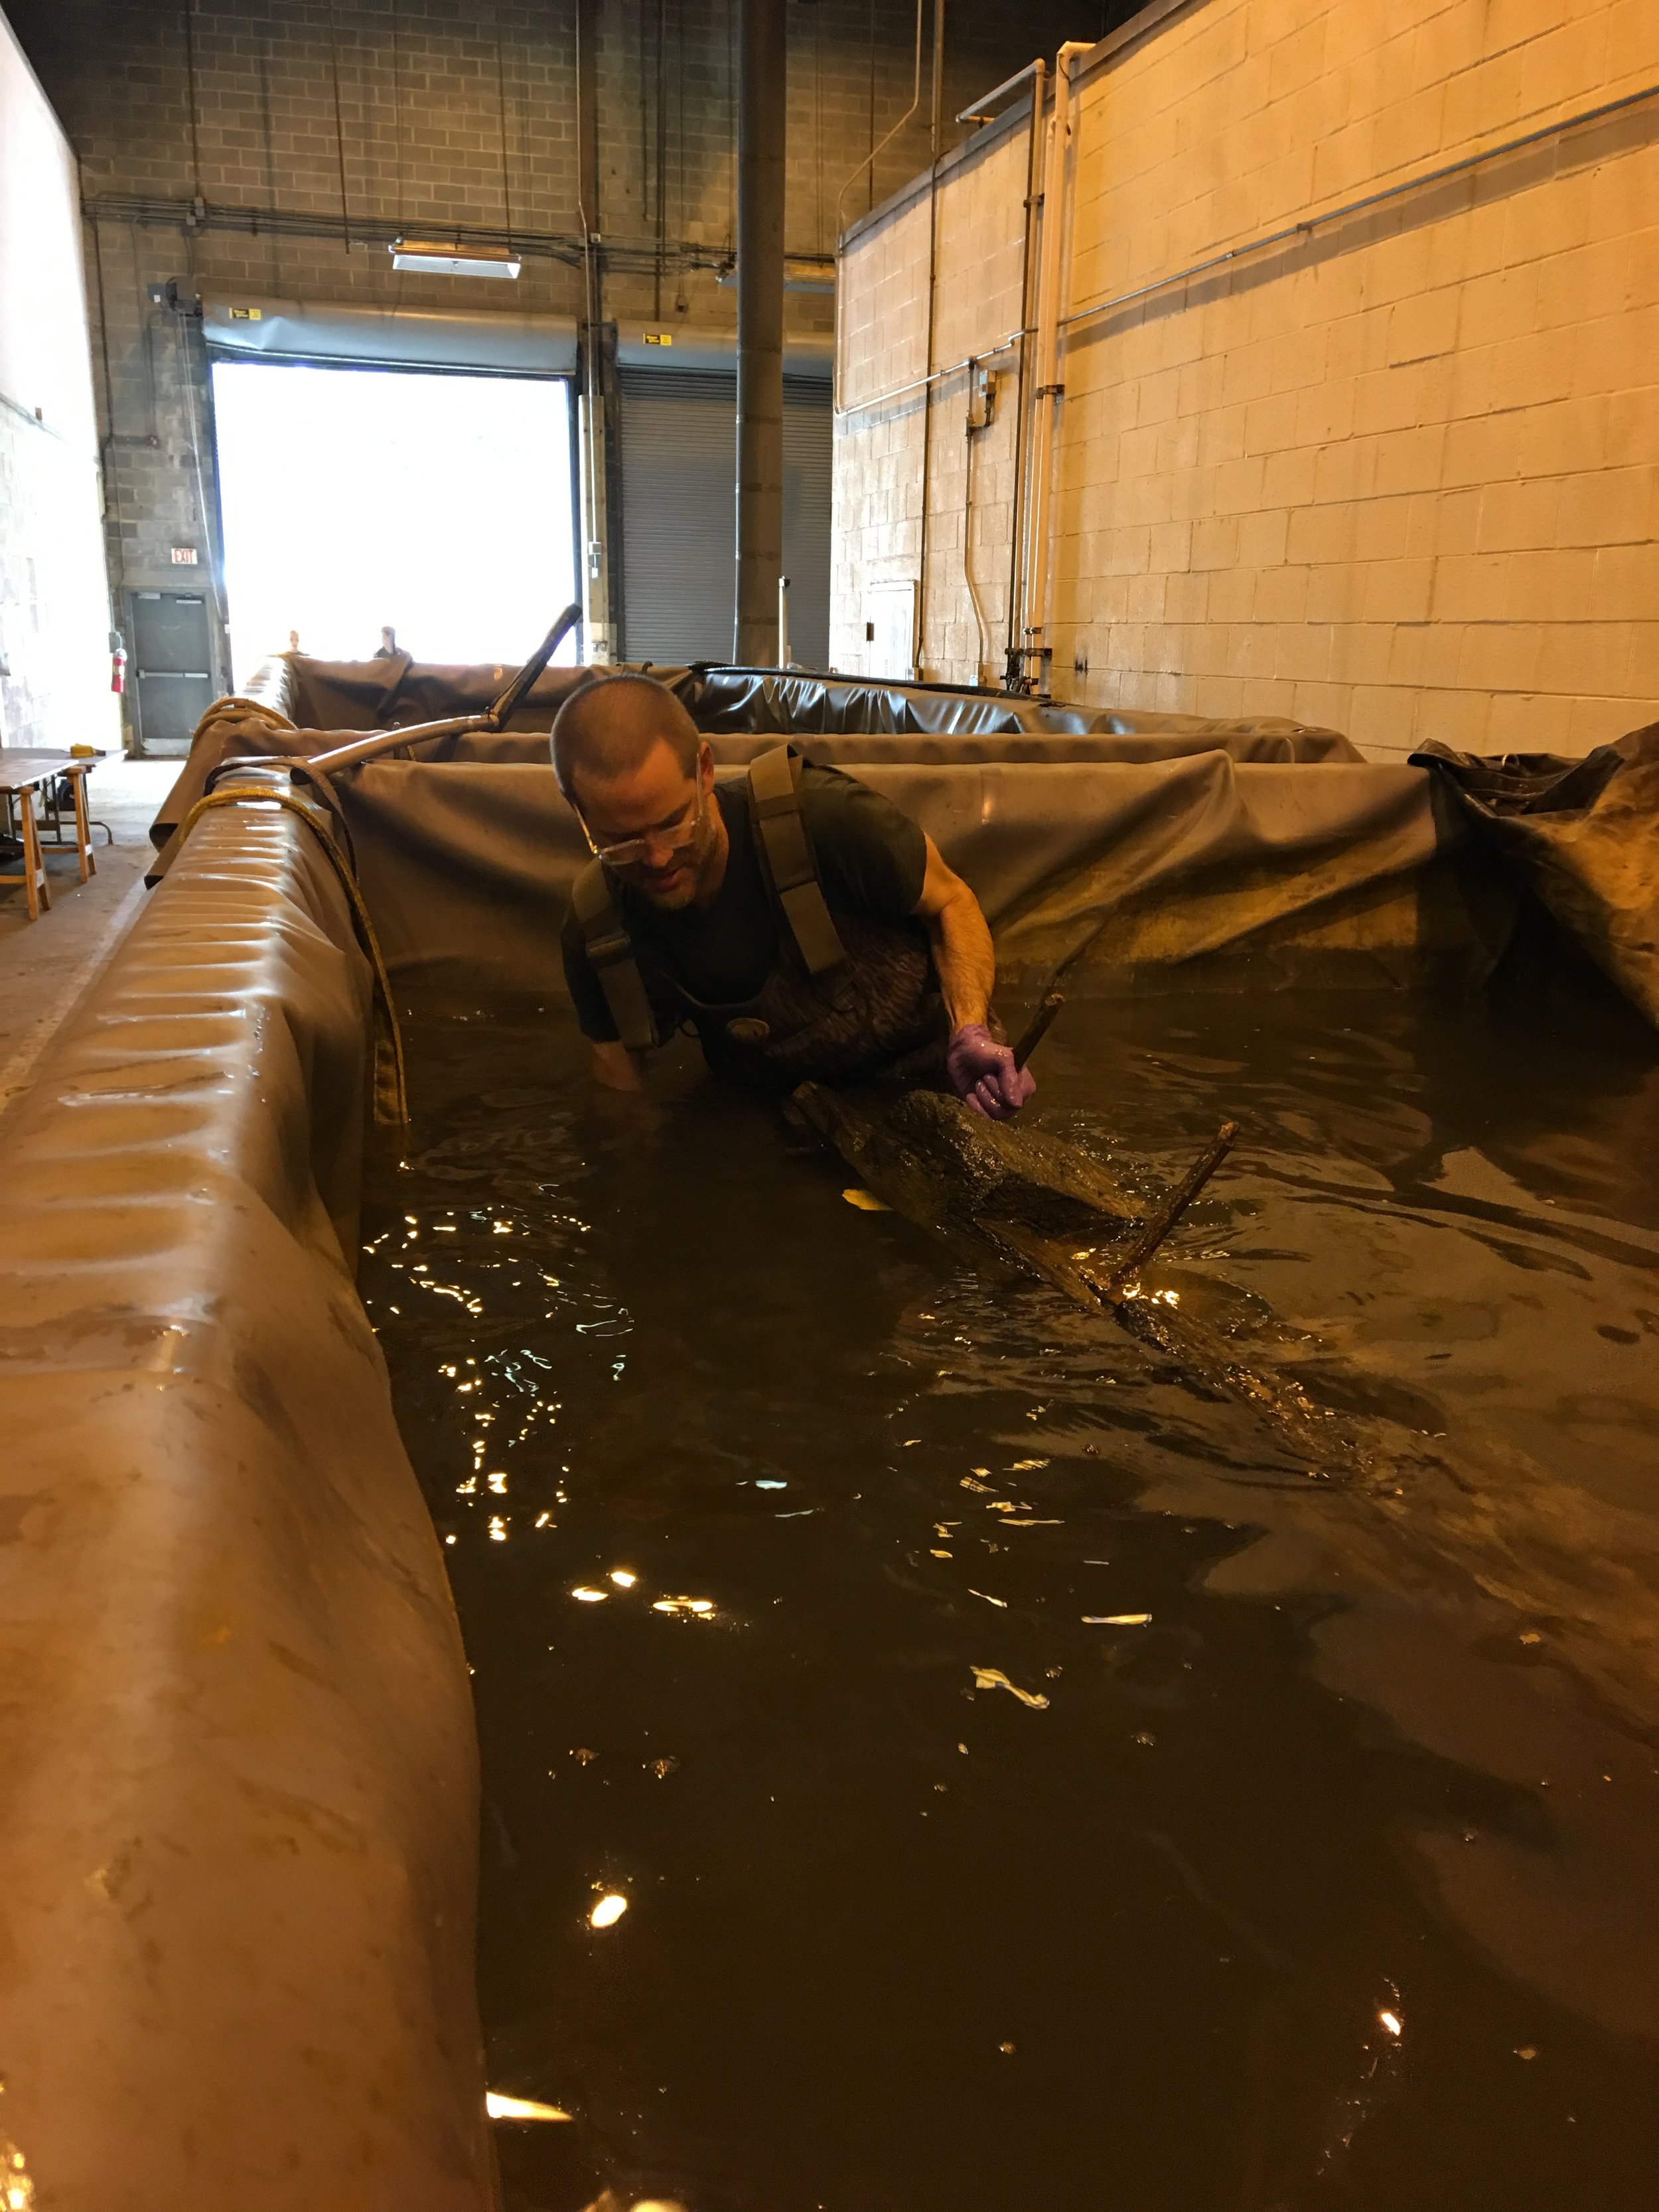  WSSI archeologist Ed Johnson helps as timbers are lifted from conservation tanks.  In June 2017, Ed and other volunteers removed timbers from their tanks, carefully packed them, and sent them to Texas A&amp;M University's  Conservation Research Labo